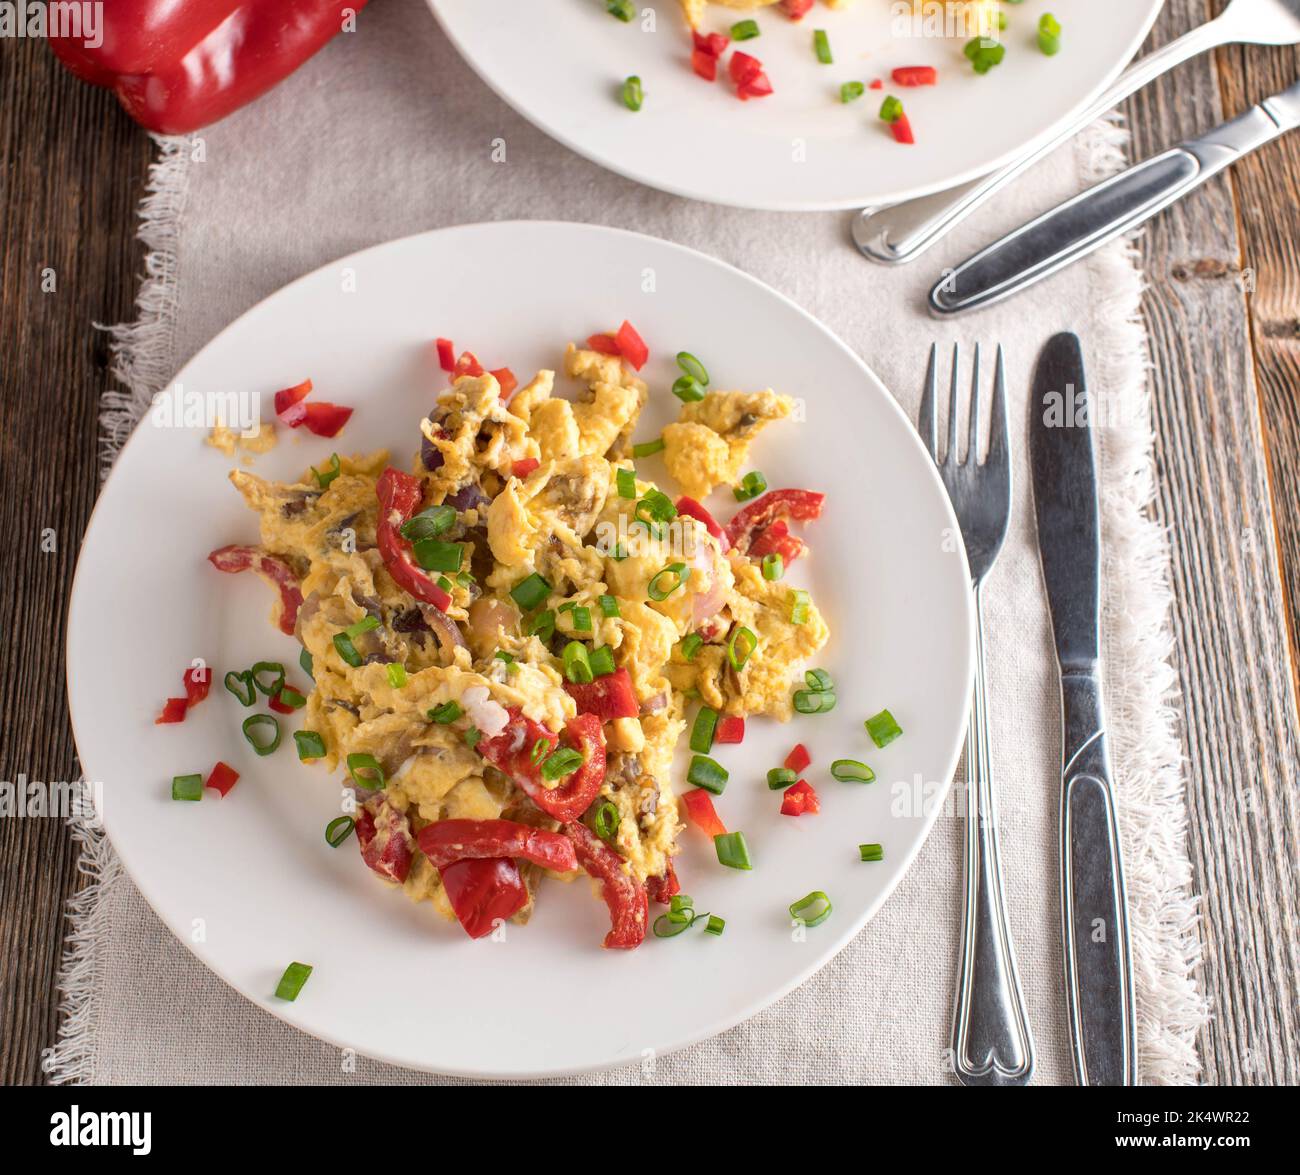 Scrambled eggs with vegetables on a plate Stock Photo